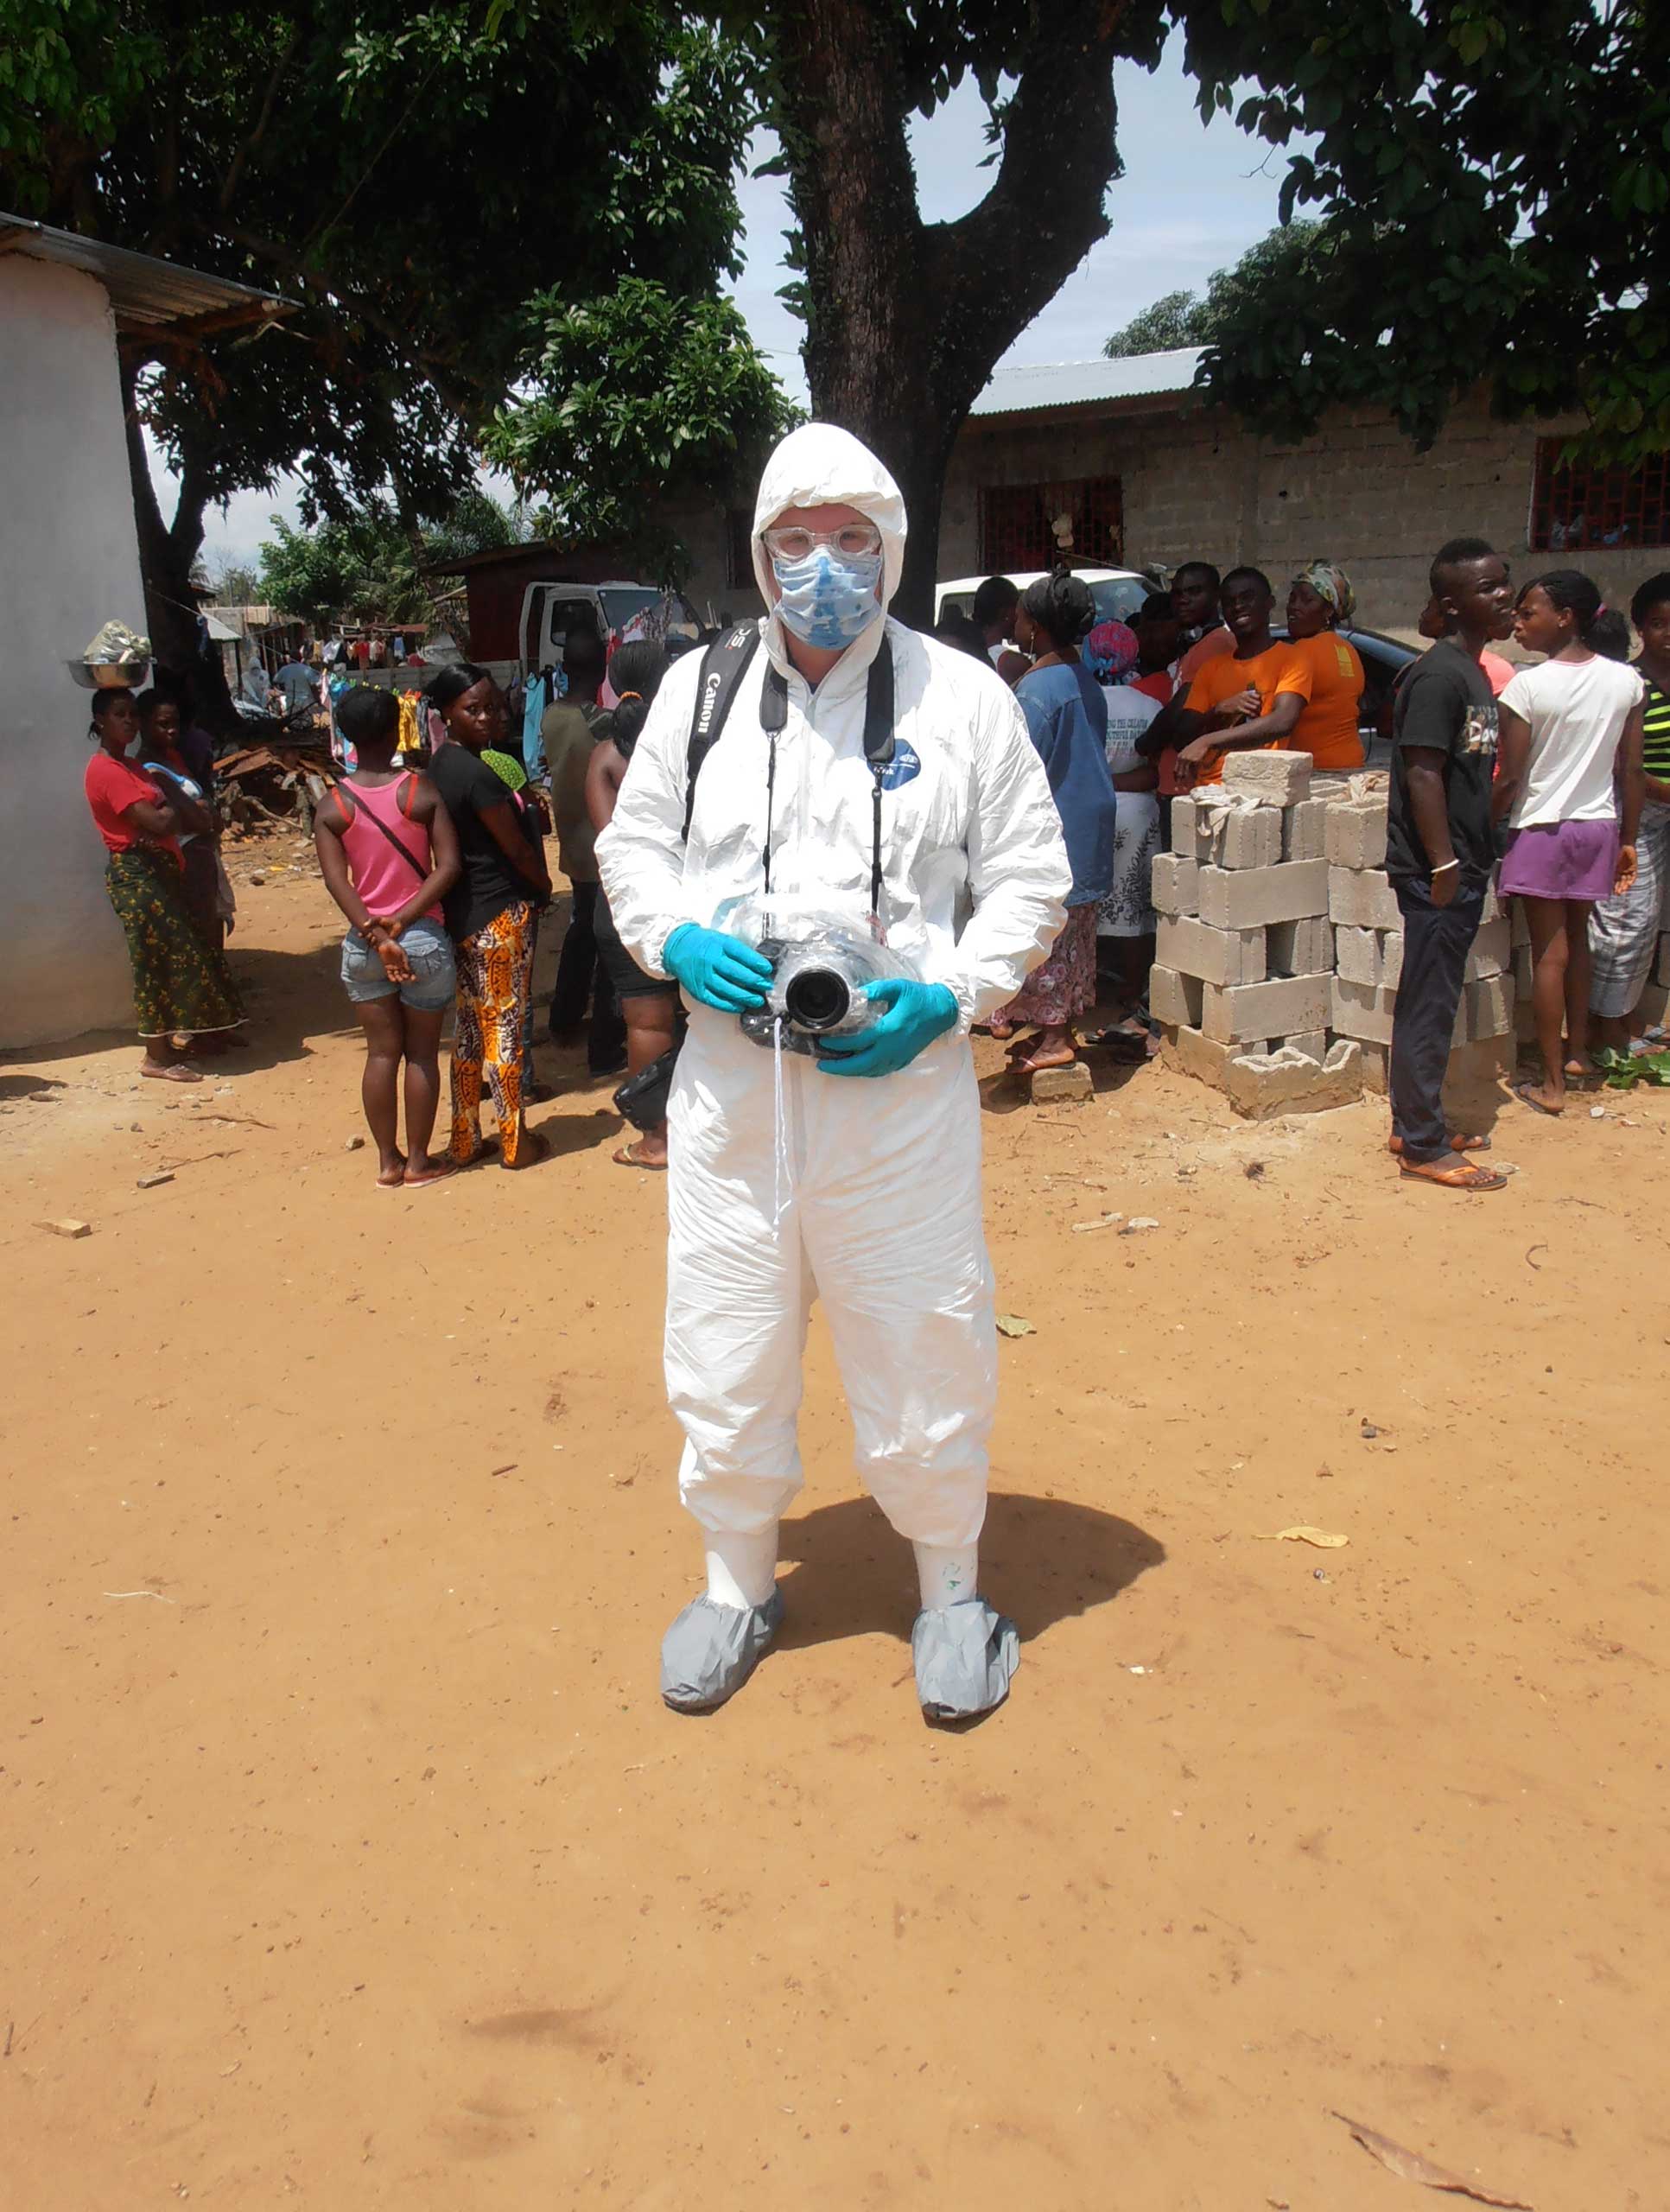 Getty Images staff photographer John Moore wears protective clothing, knows as personal protective equipment (PPE), before joining a Liberian burial team set to remove the body of an Ebola victim from her home in August 14, 2014 in Monrovia, Liberia.